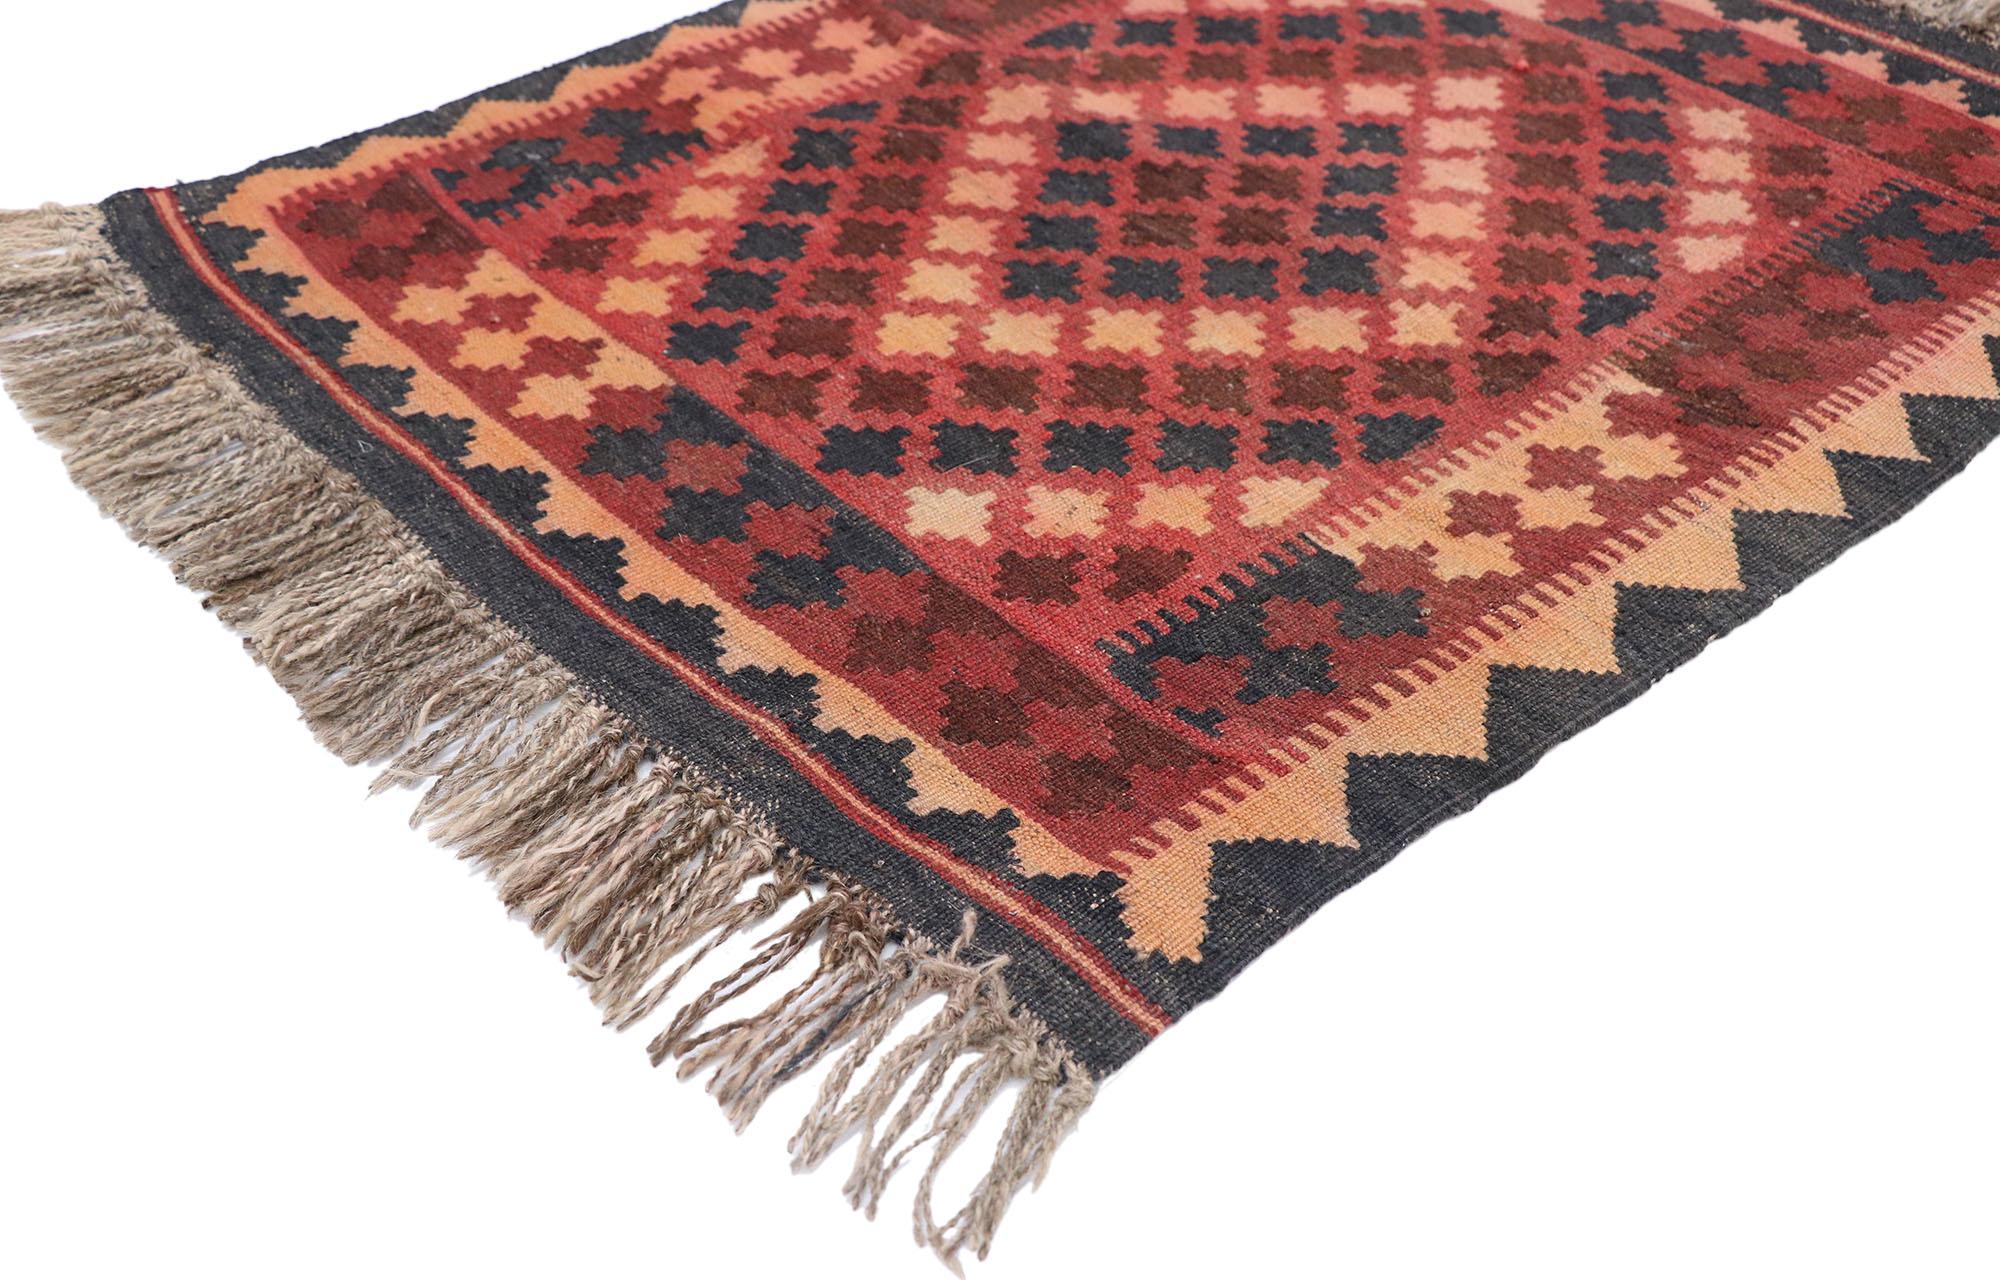 77883 Vintage Afghani Maimana Kilim rug with modern Tribal style 02'05 x 03'02. Full of tiny details and a bold expressive design combined with vibrant colors and tribal style, this hand-woven wool vintage Afghani Maimana kilim rug is a captivating